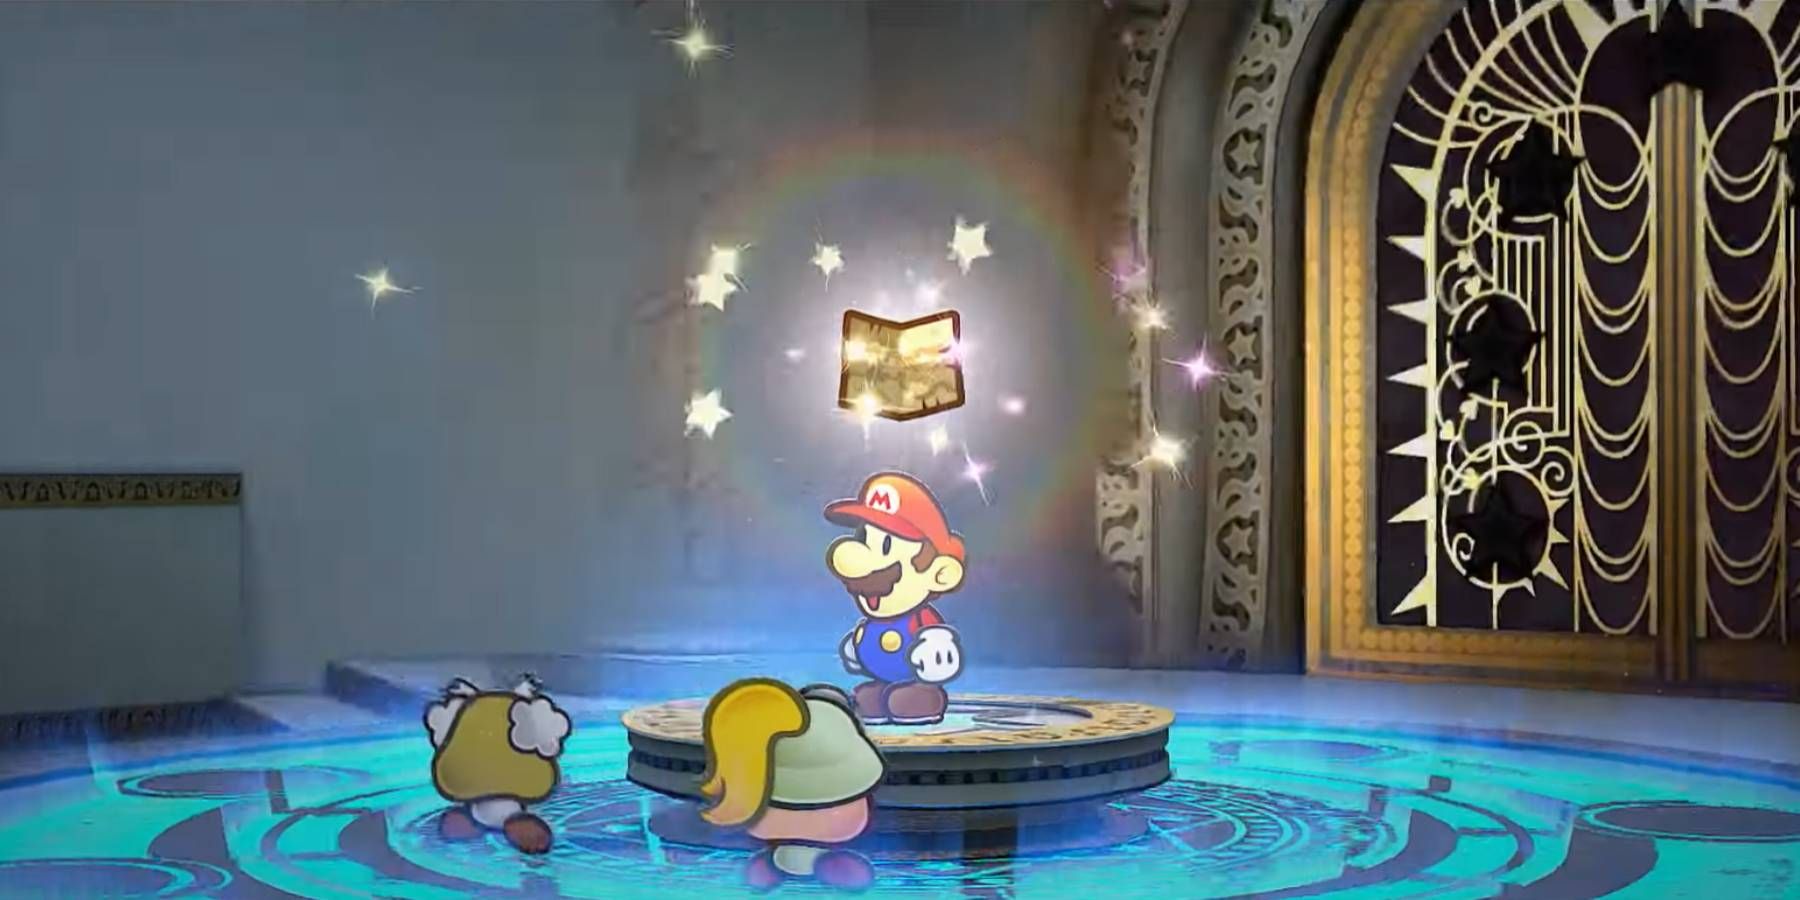 Mario using the Magical Map in Paper Mario: The Thousand-Year Door